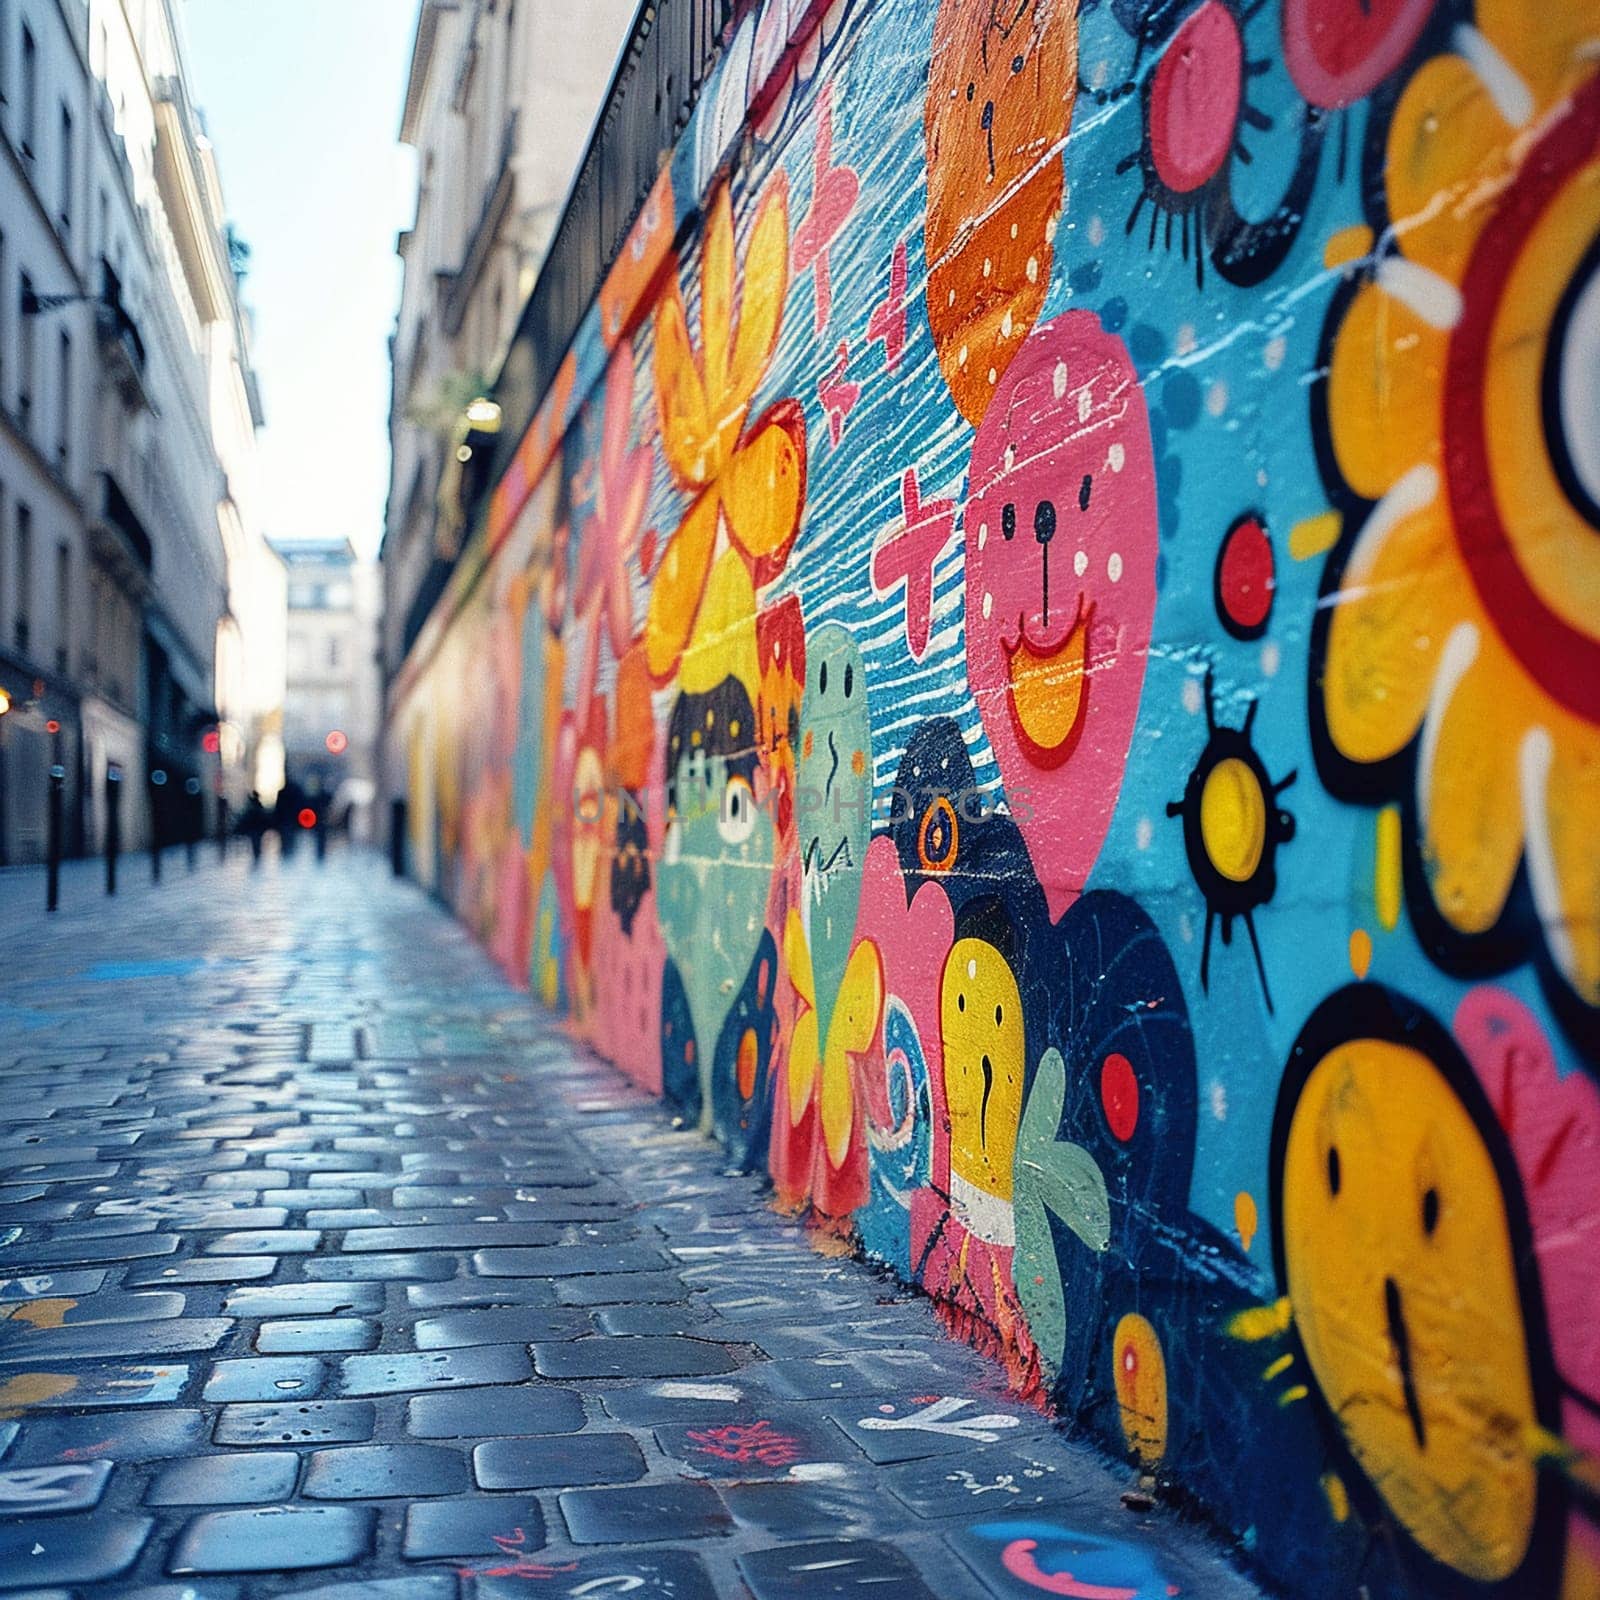 Vibrant graffiti wall in urban setting, capturing the essence of street art and culture.